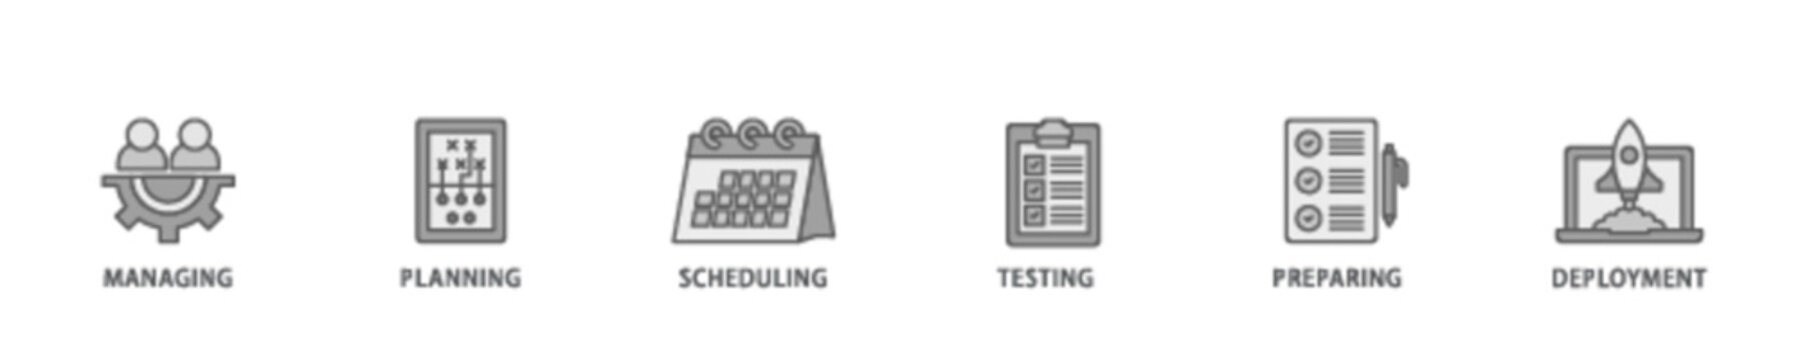 Release management banner web icon illustration concept with icon of managing, planning, scheduling, building, testing, preparing and deployment icon live stroke and easy to edit 